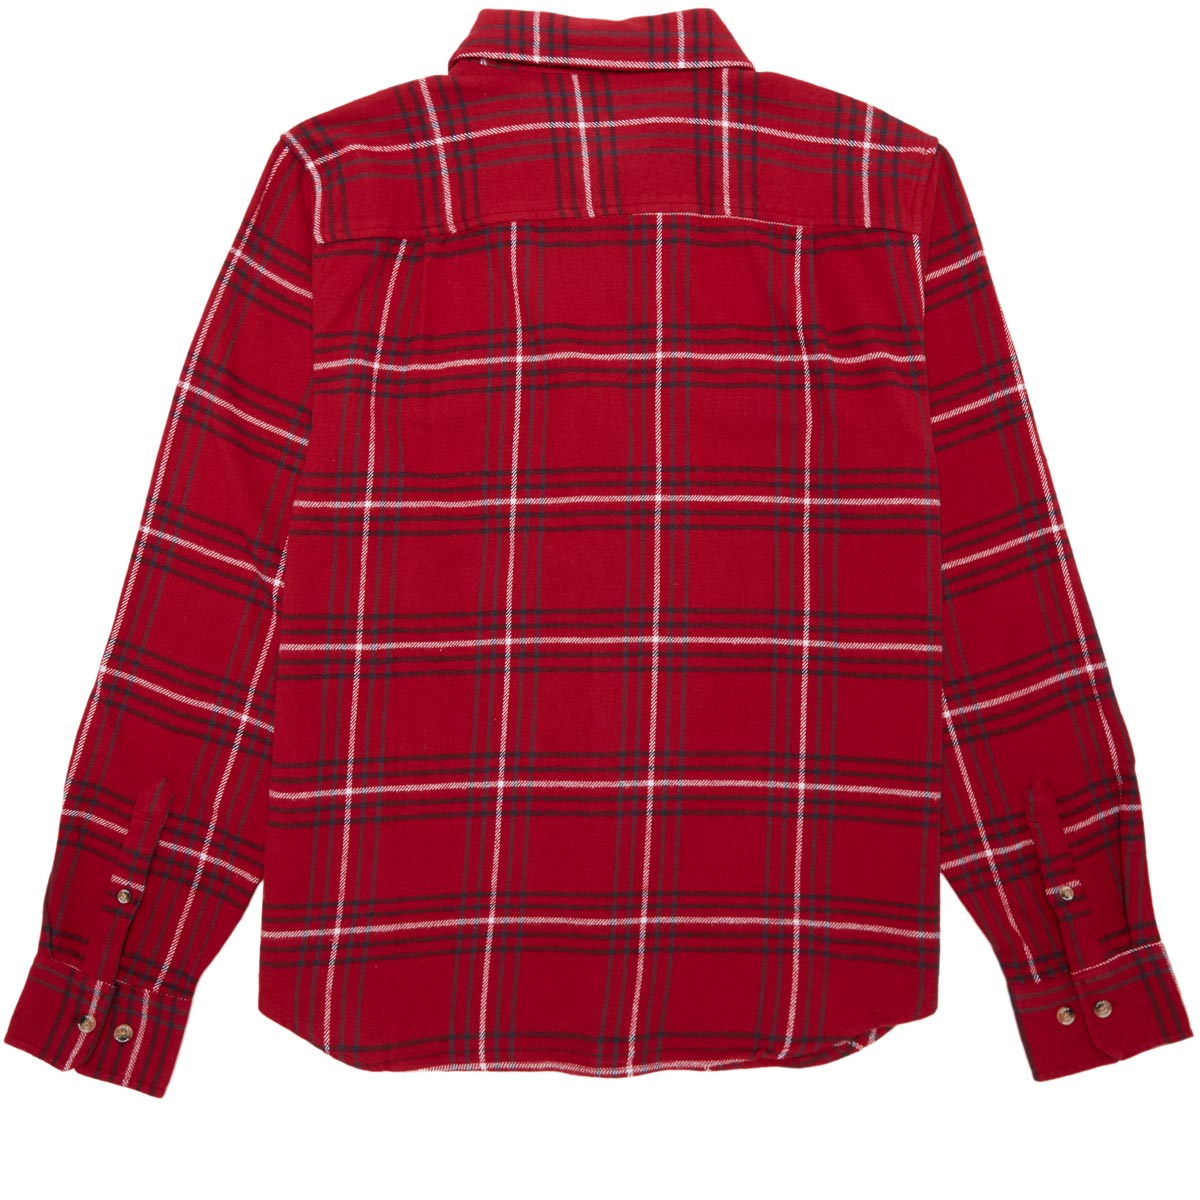 Loser Machine x Pabst Blue Ribbon Flannel Shirt - Red image 3